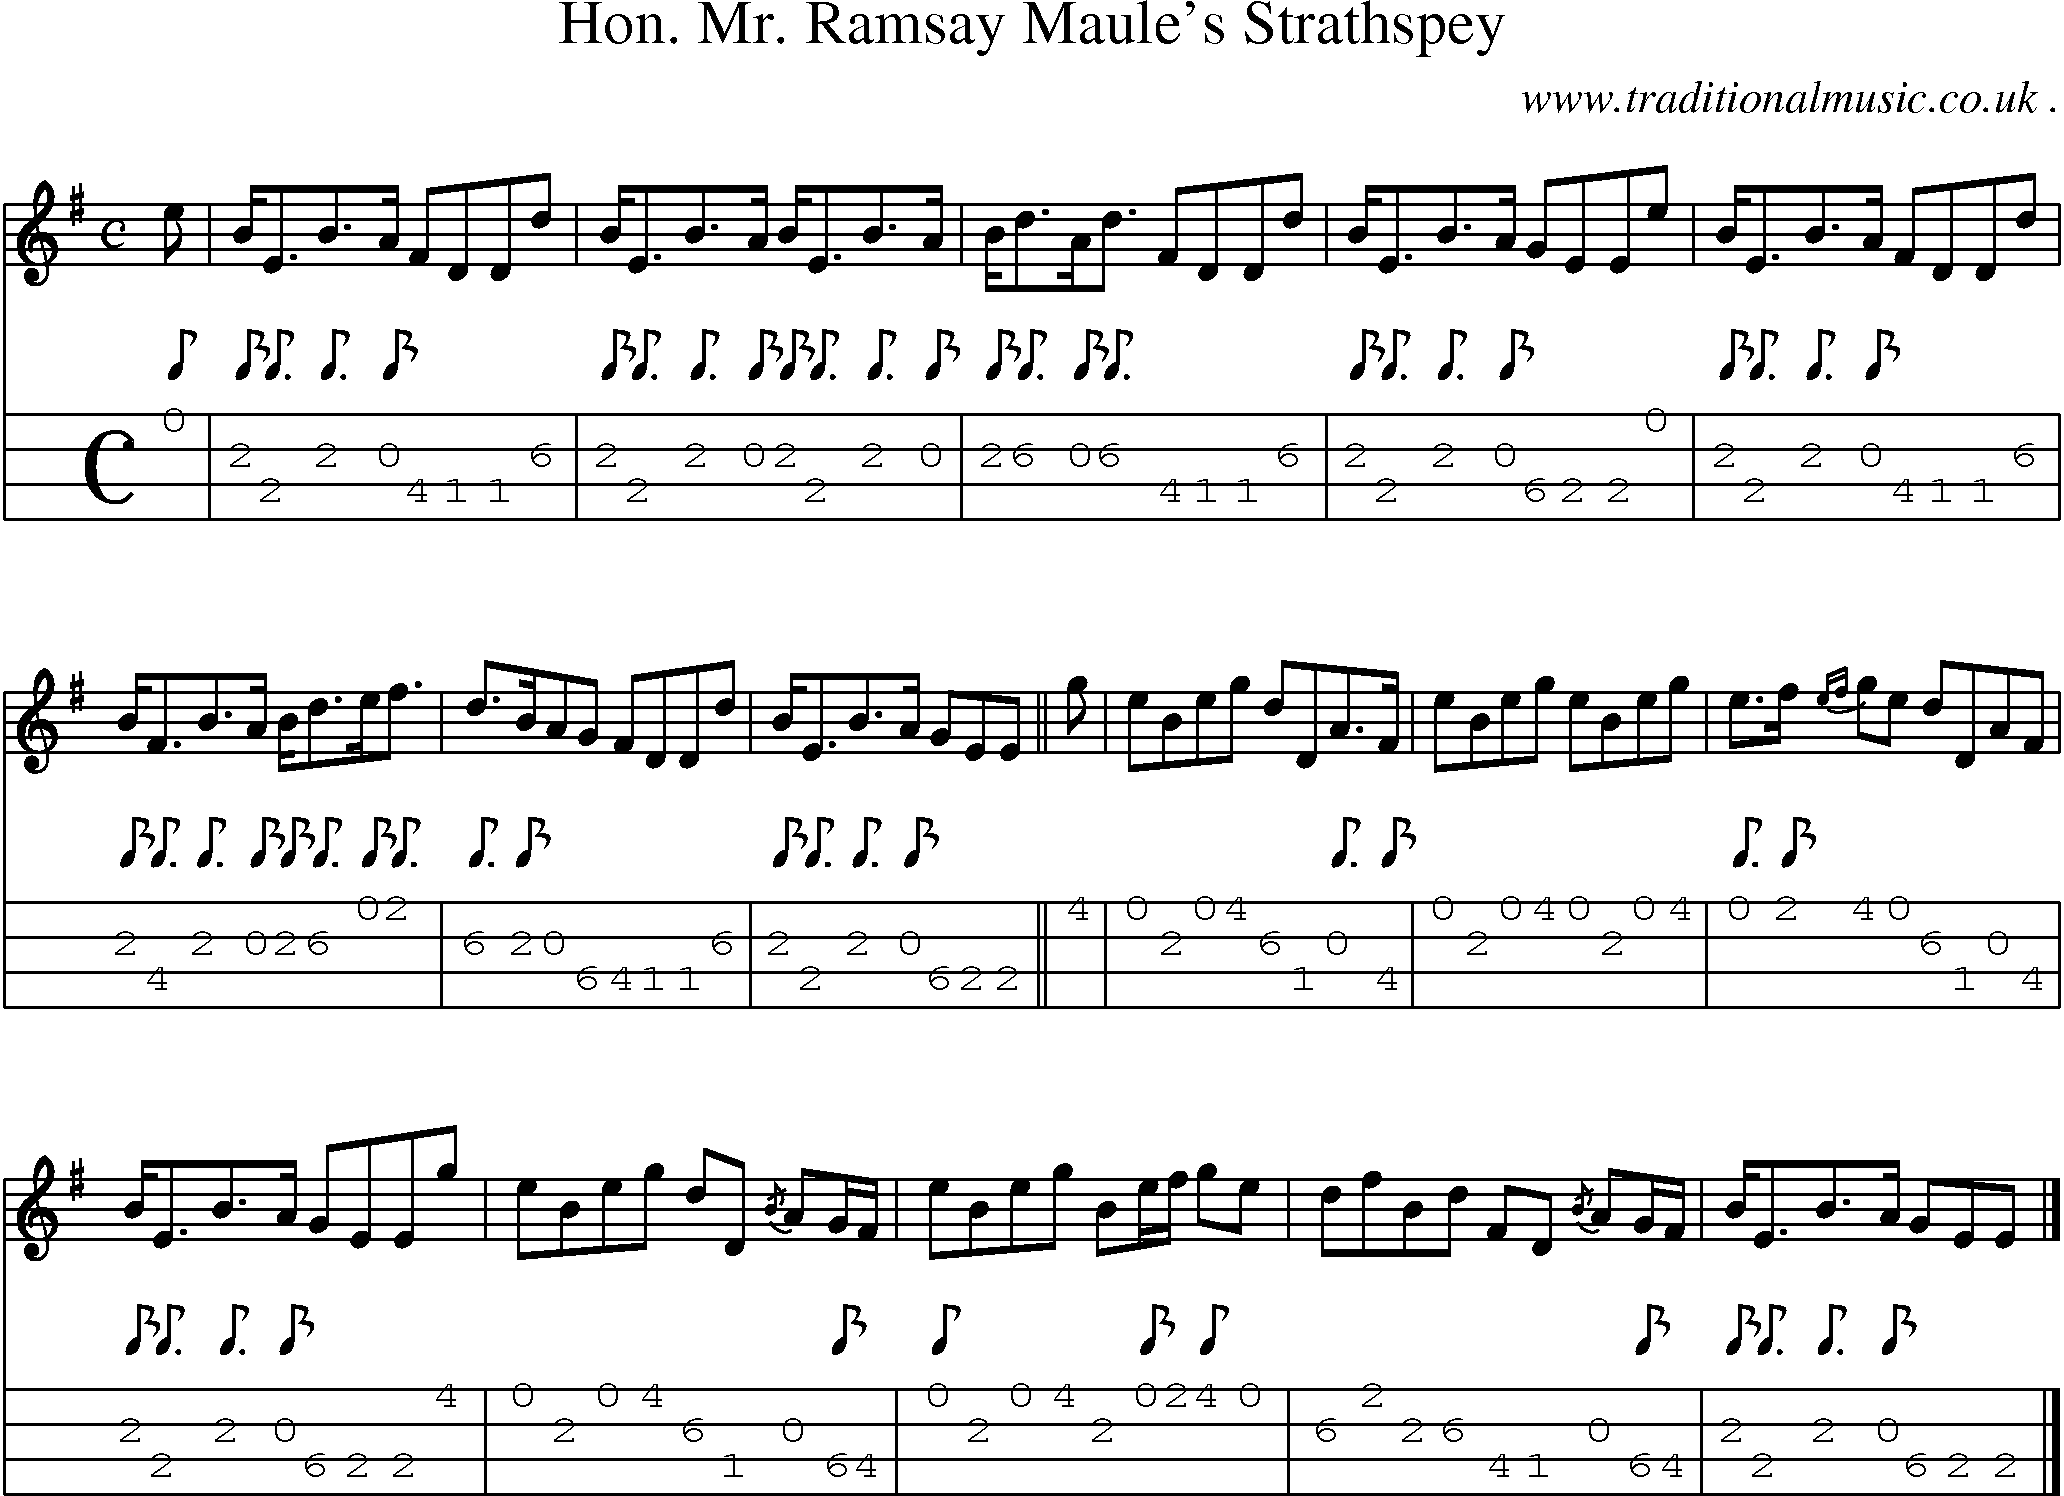 Sheet-music  score, Chords and Mandolin Tabs for Hon Mr Ramsay Maules Strathspey